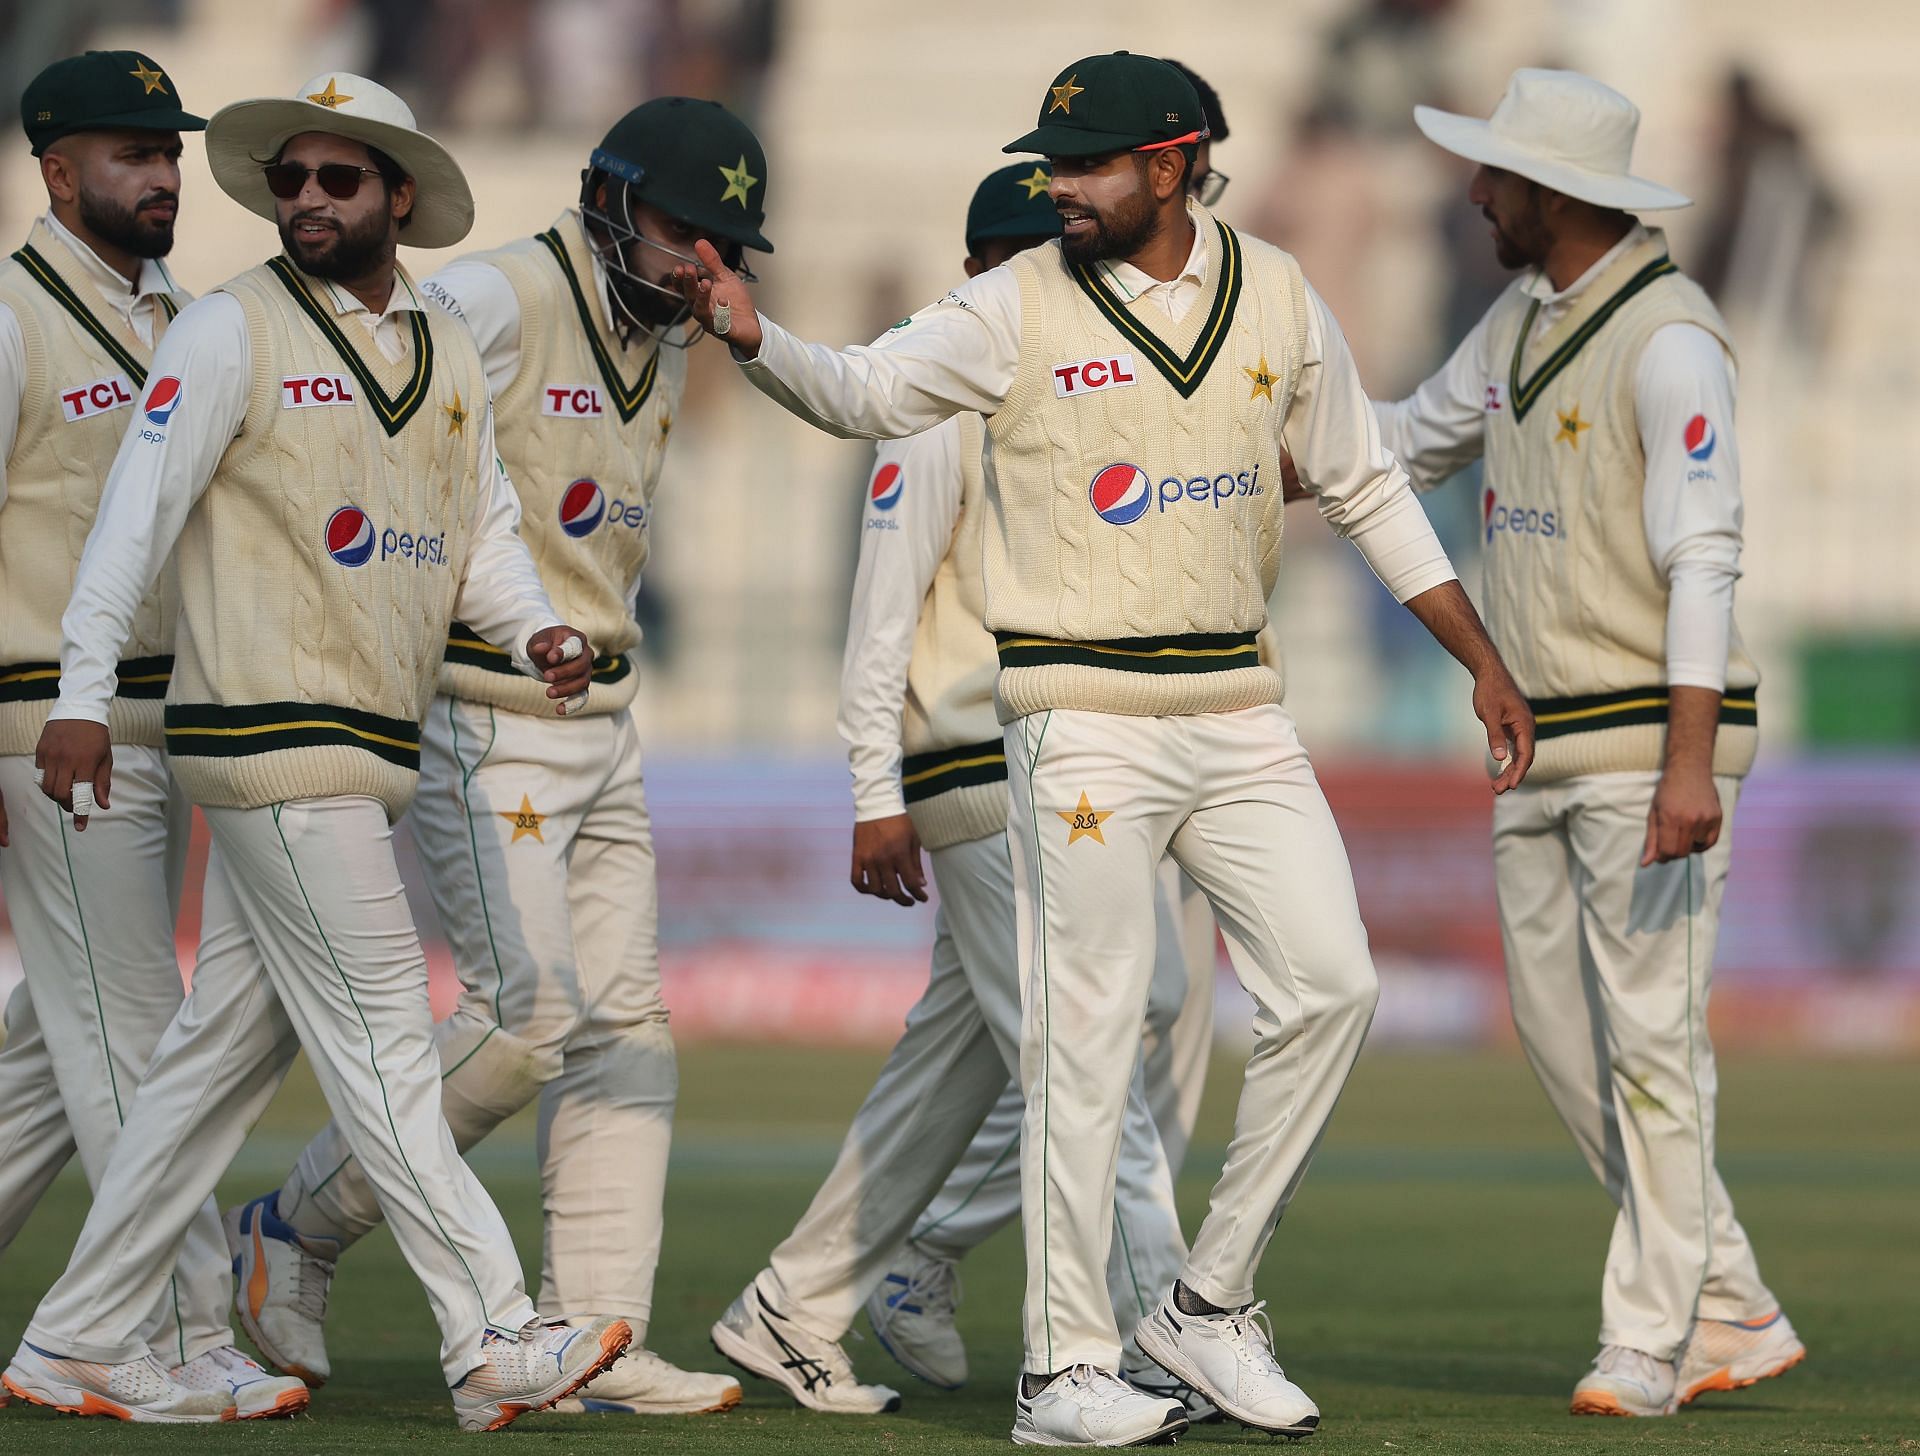 Warm-up game to precede the two Tests as Pakistan announce schedule for Sri Lanka tour